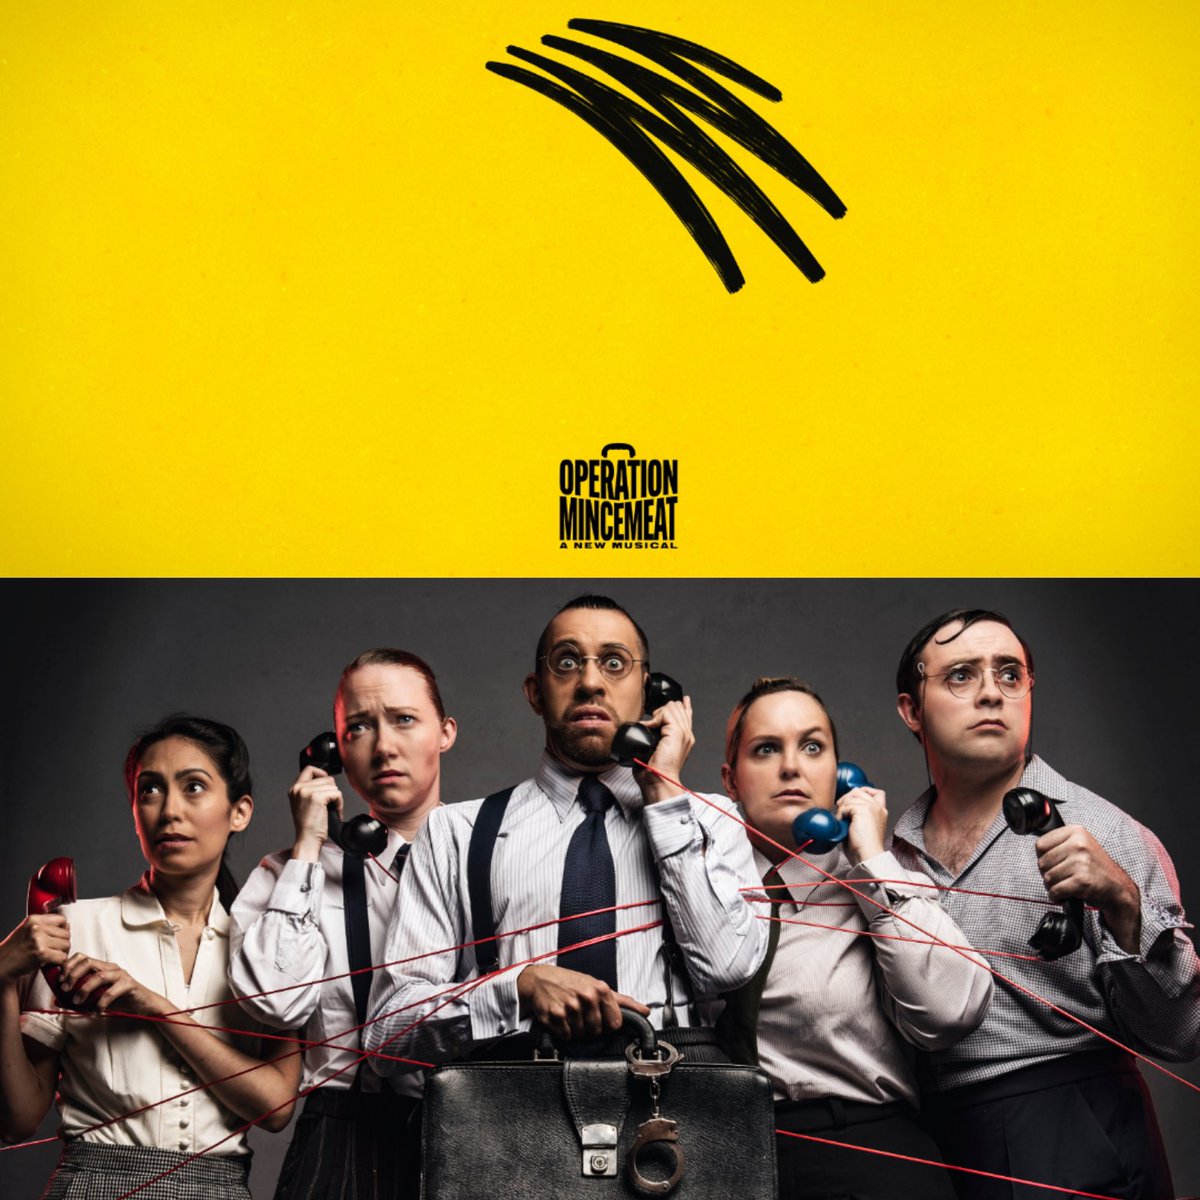 As a breakfast show host, there isn’t much that I will stay up late for. However, Operation Mincemeat - @mincemeatlive - I will happily lose sleep for. Second time seeing it tonight and it remains the best thing on stage in the capital city. You absolutely must go.